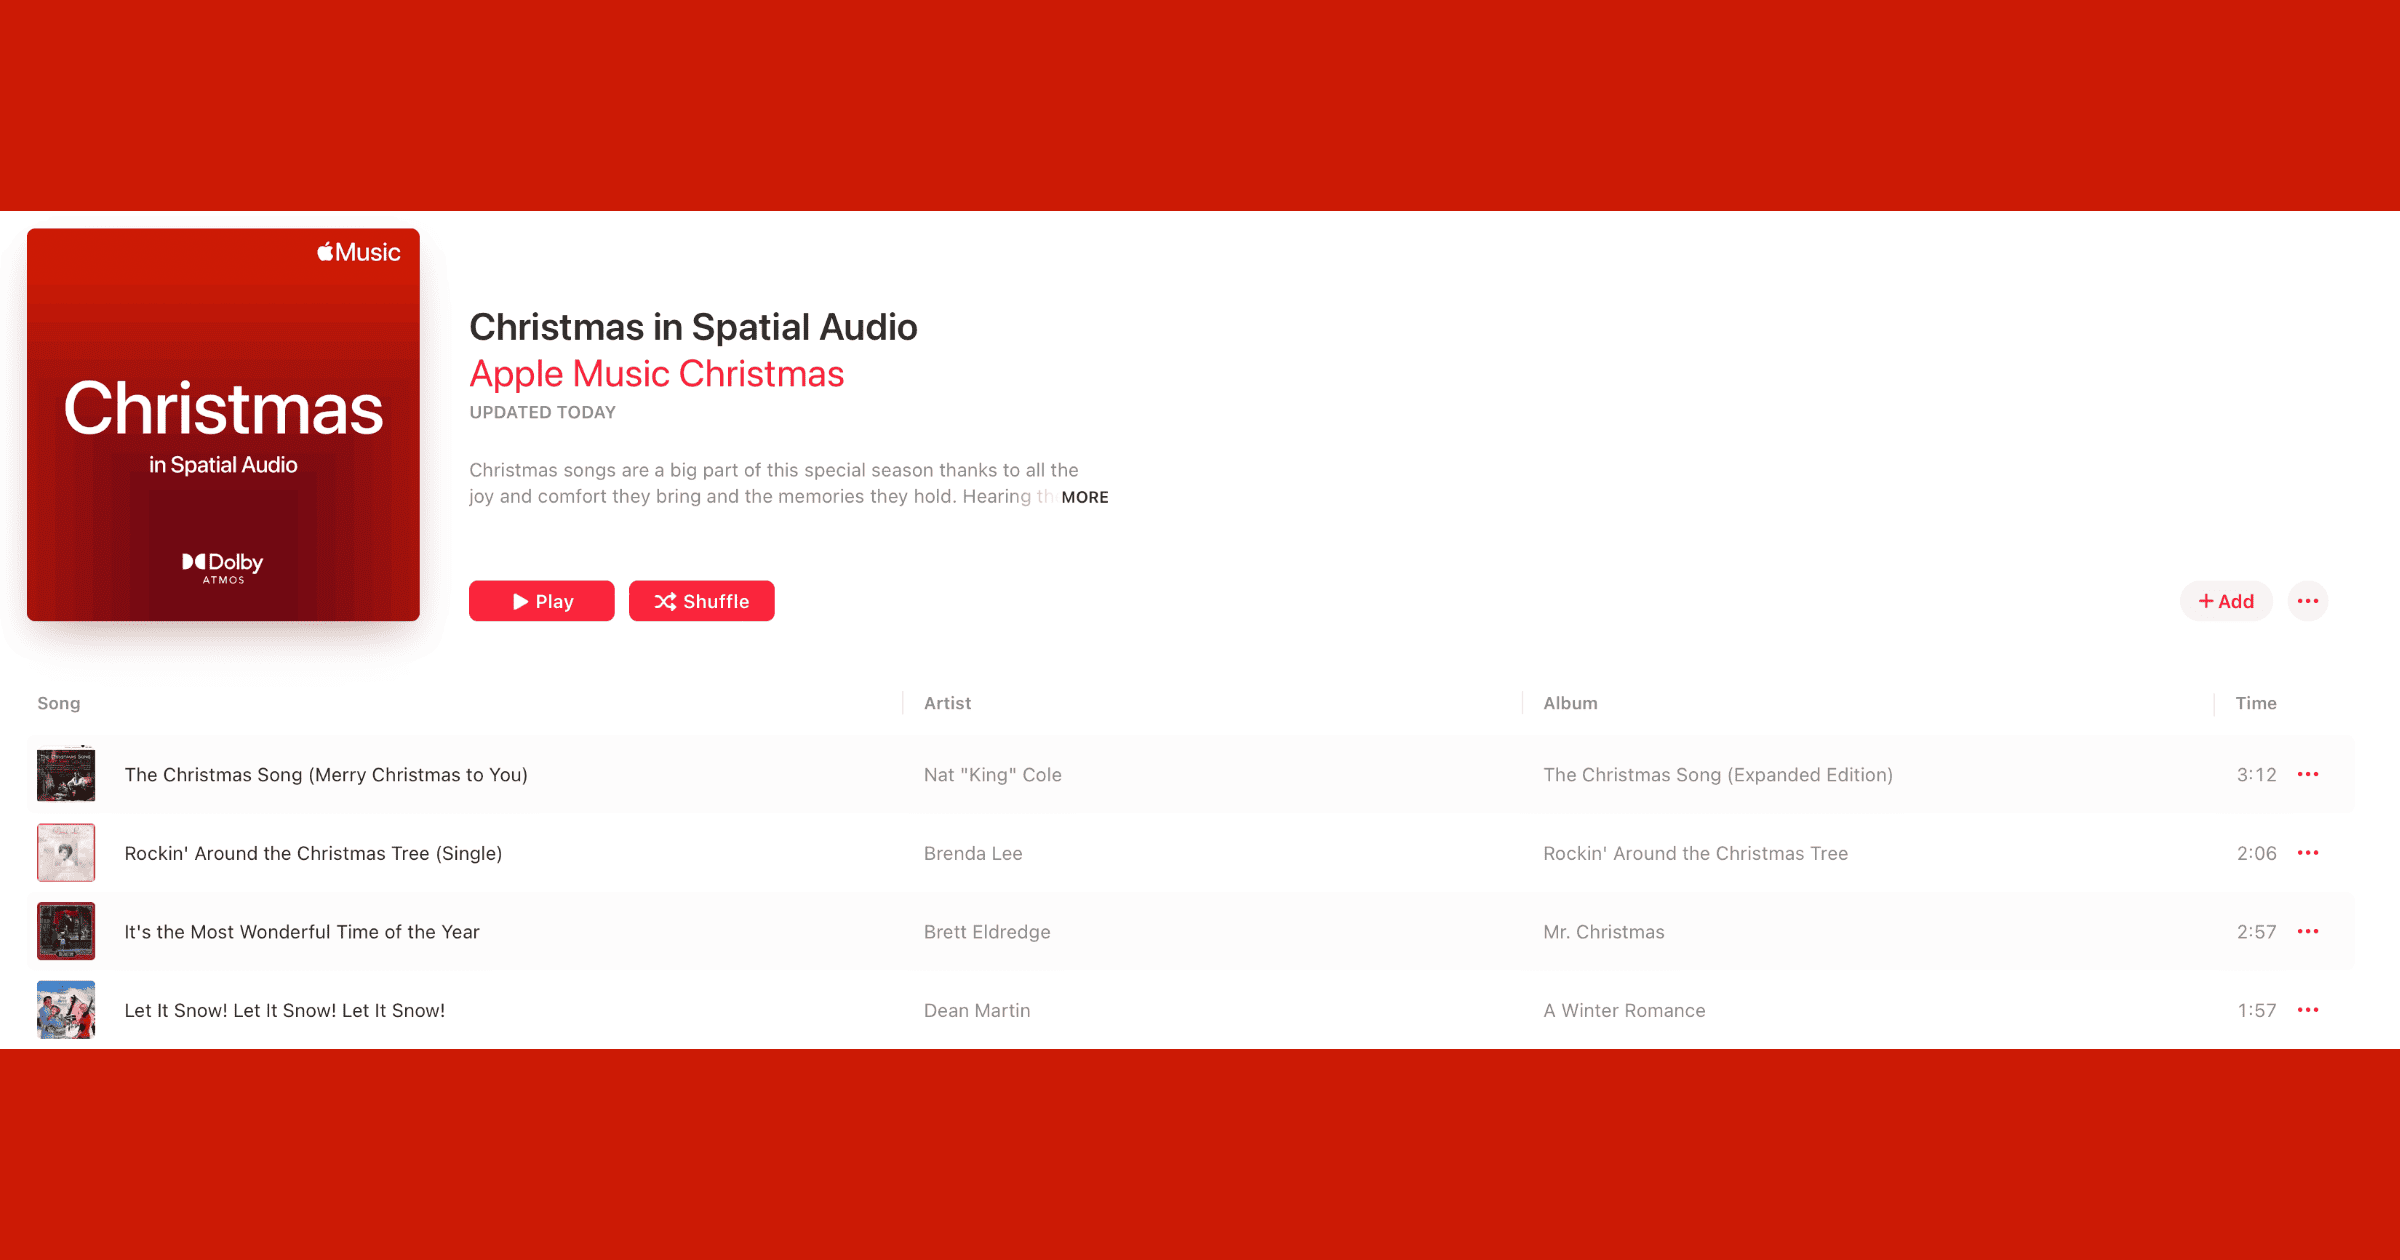 Apple Music Christmas in Spatial Audio